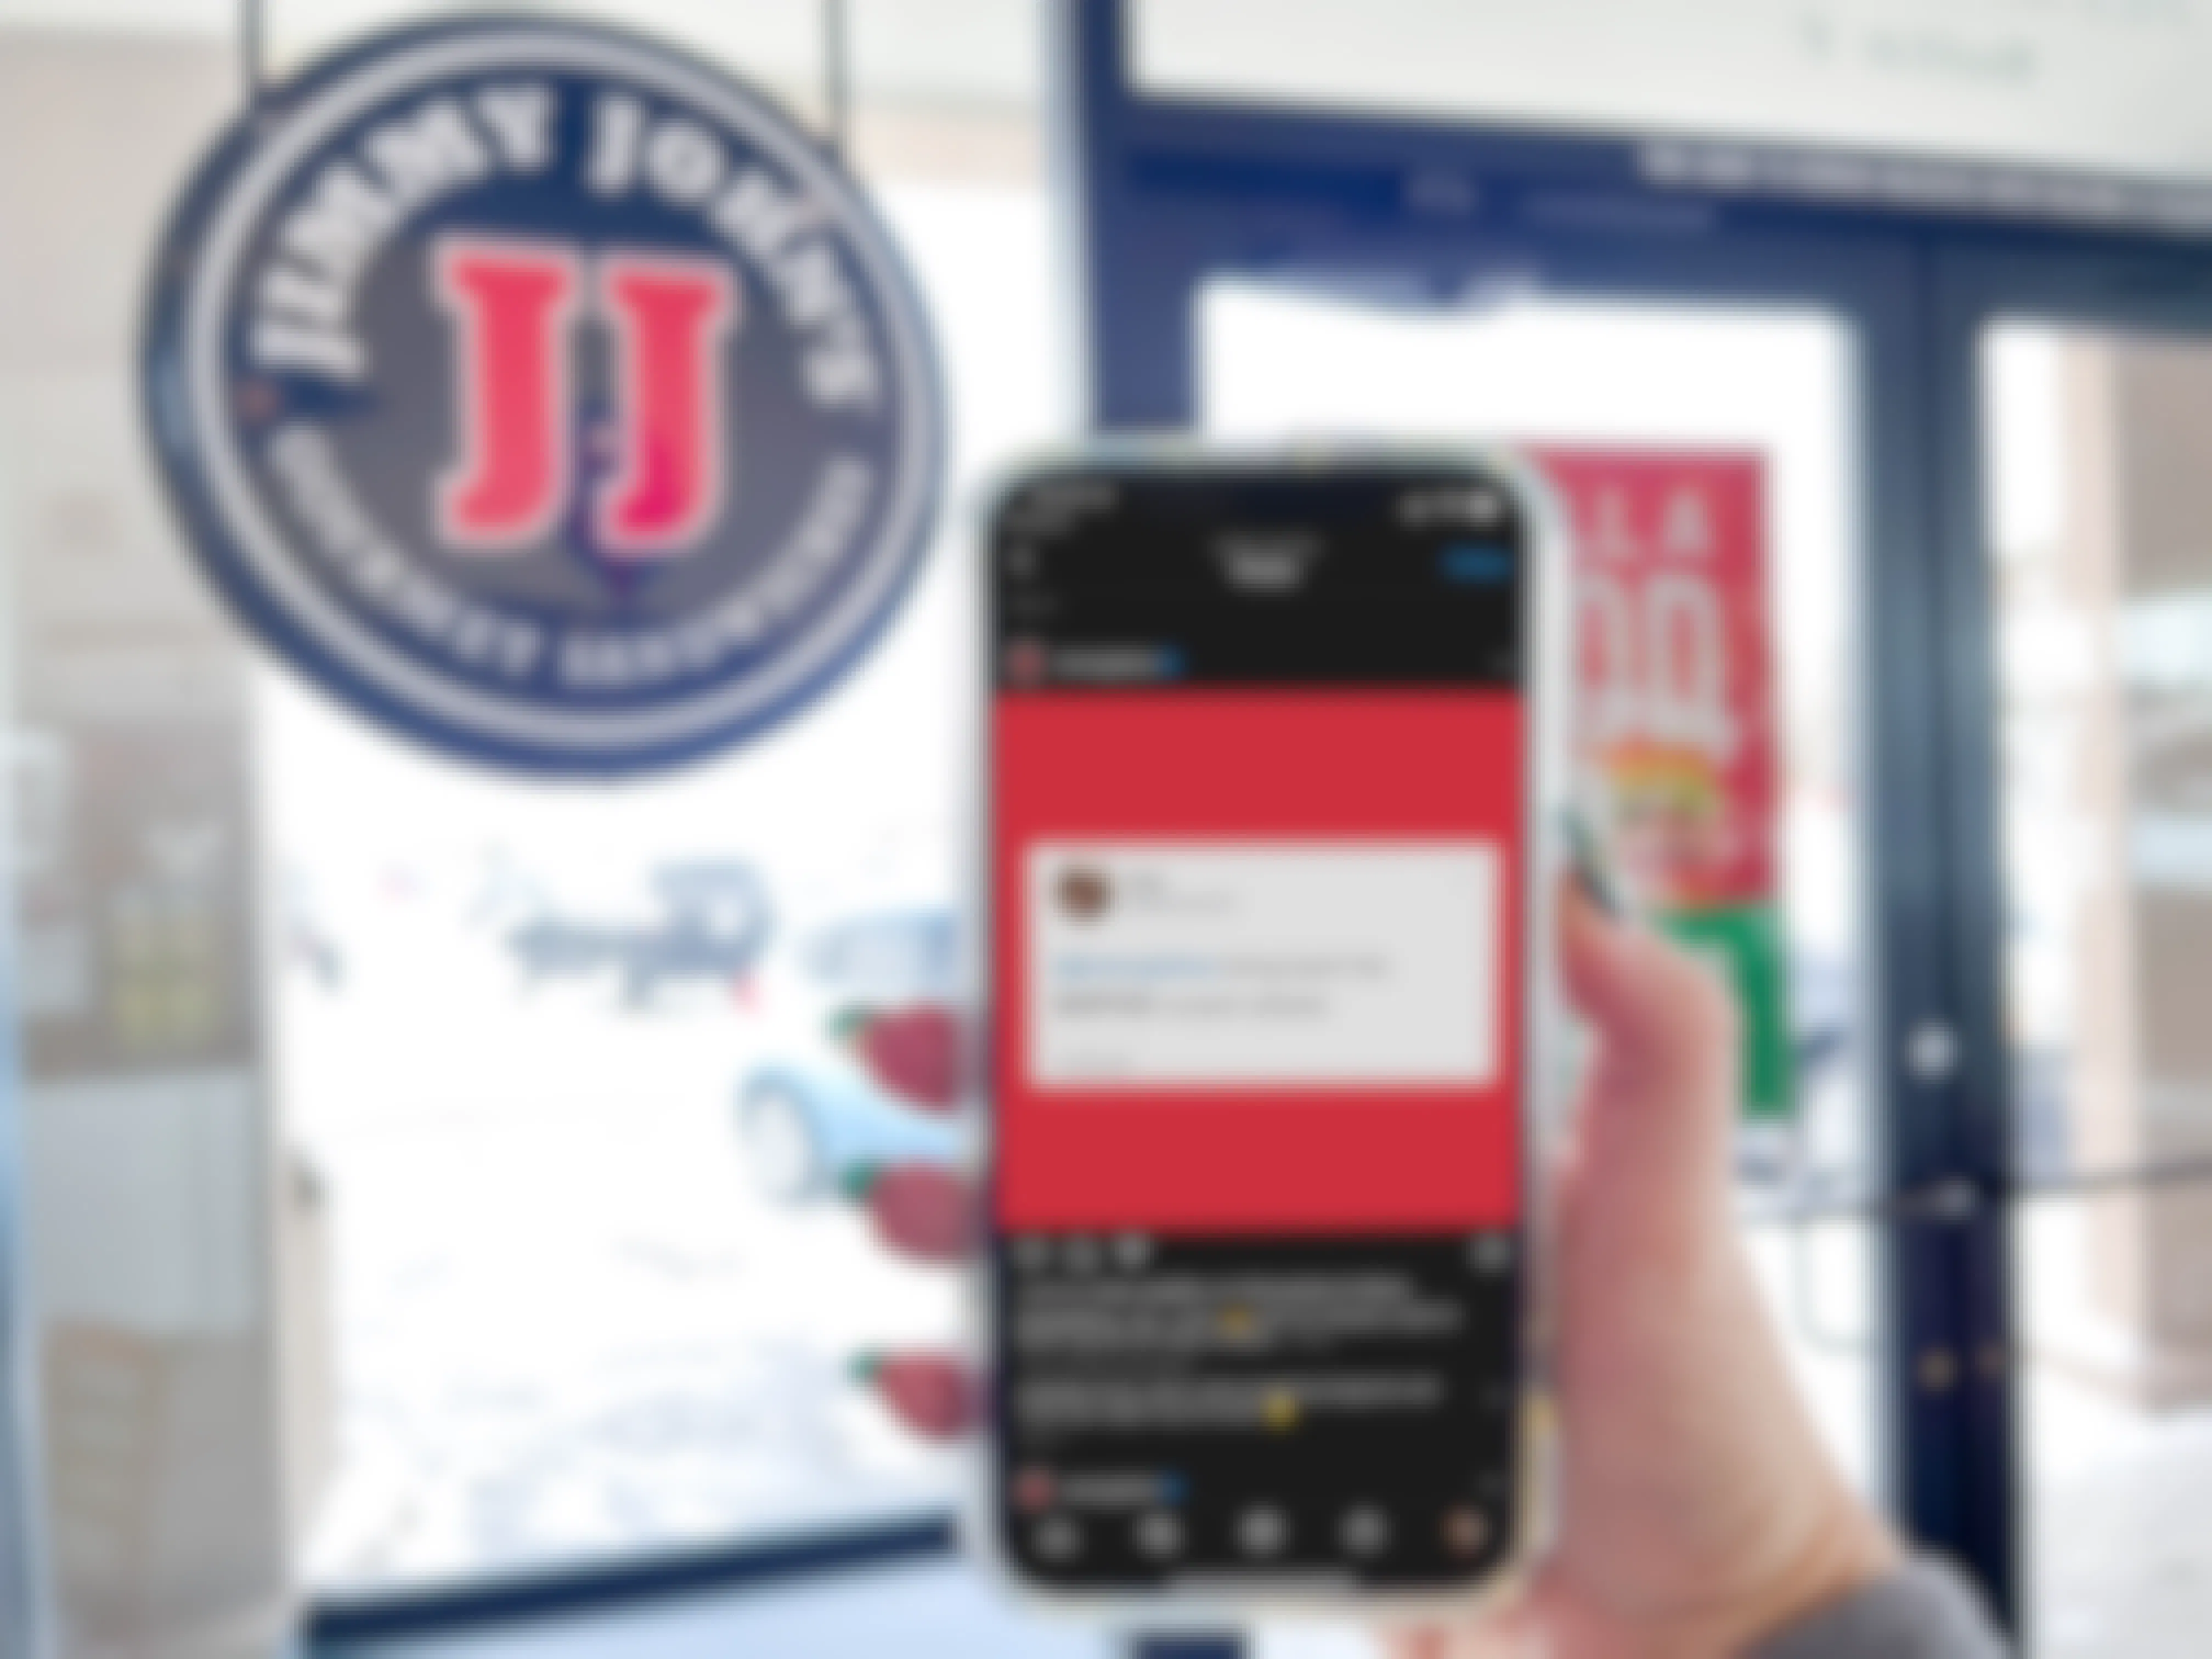 hand holding phone with jimmy johns app